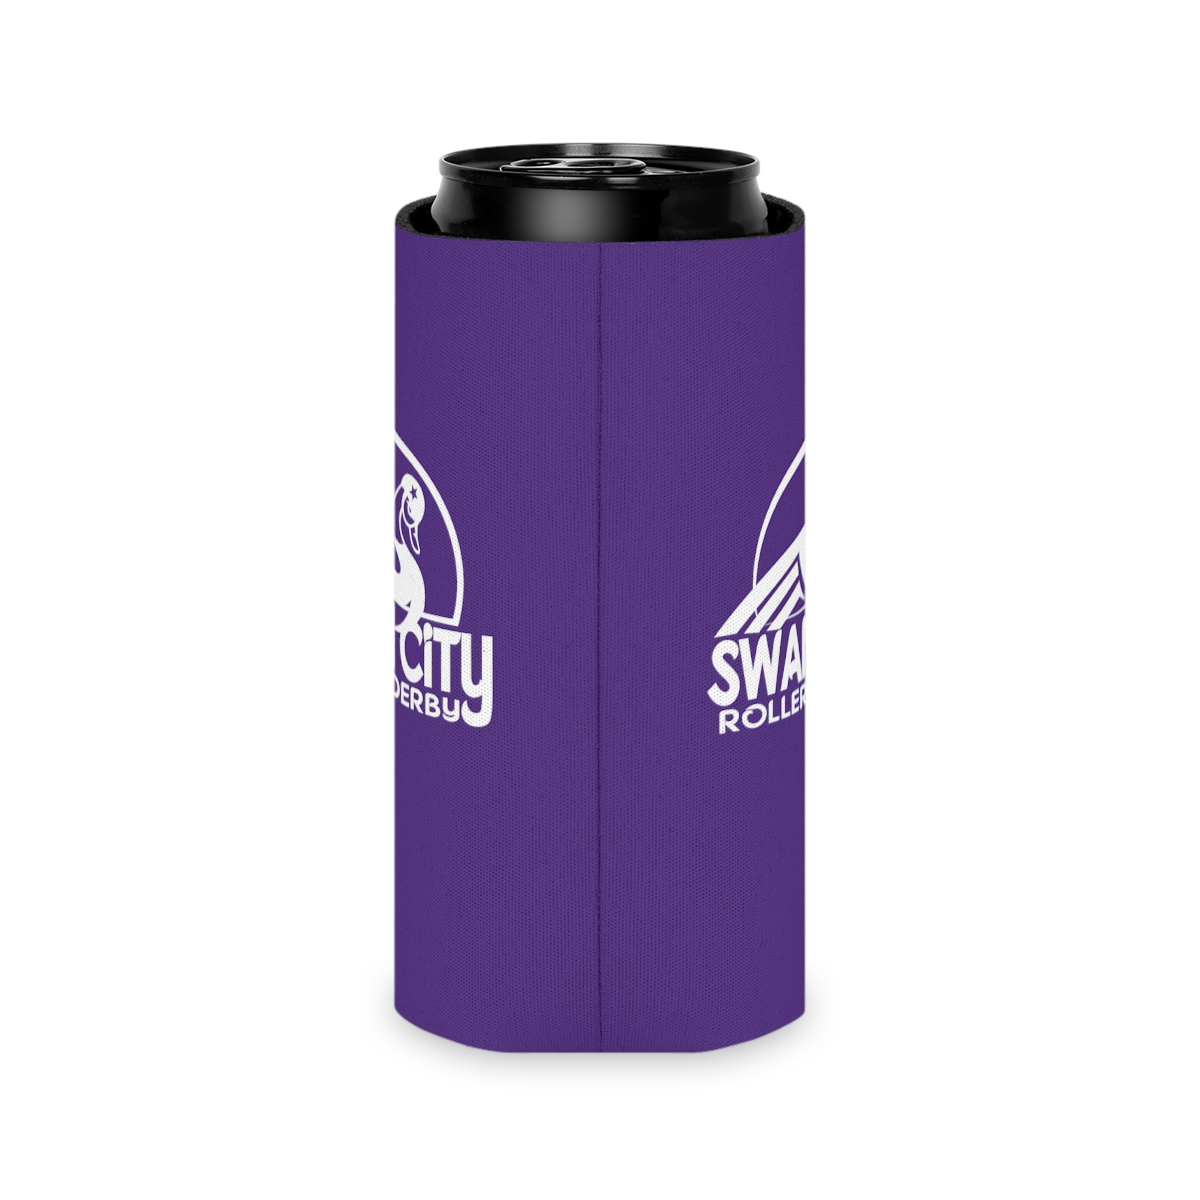 Swan City Roller Derby Coozie product thumbnail image